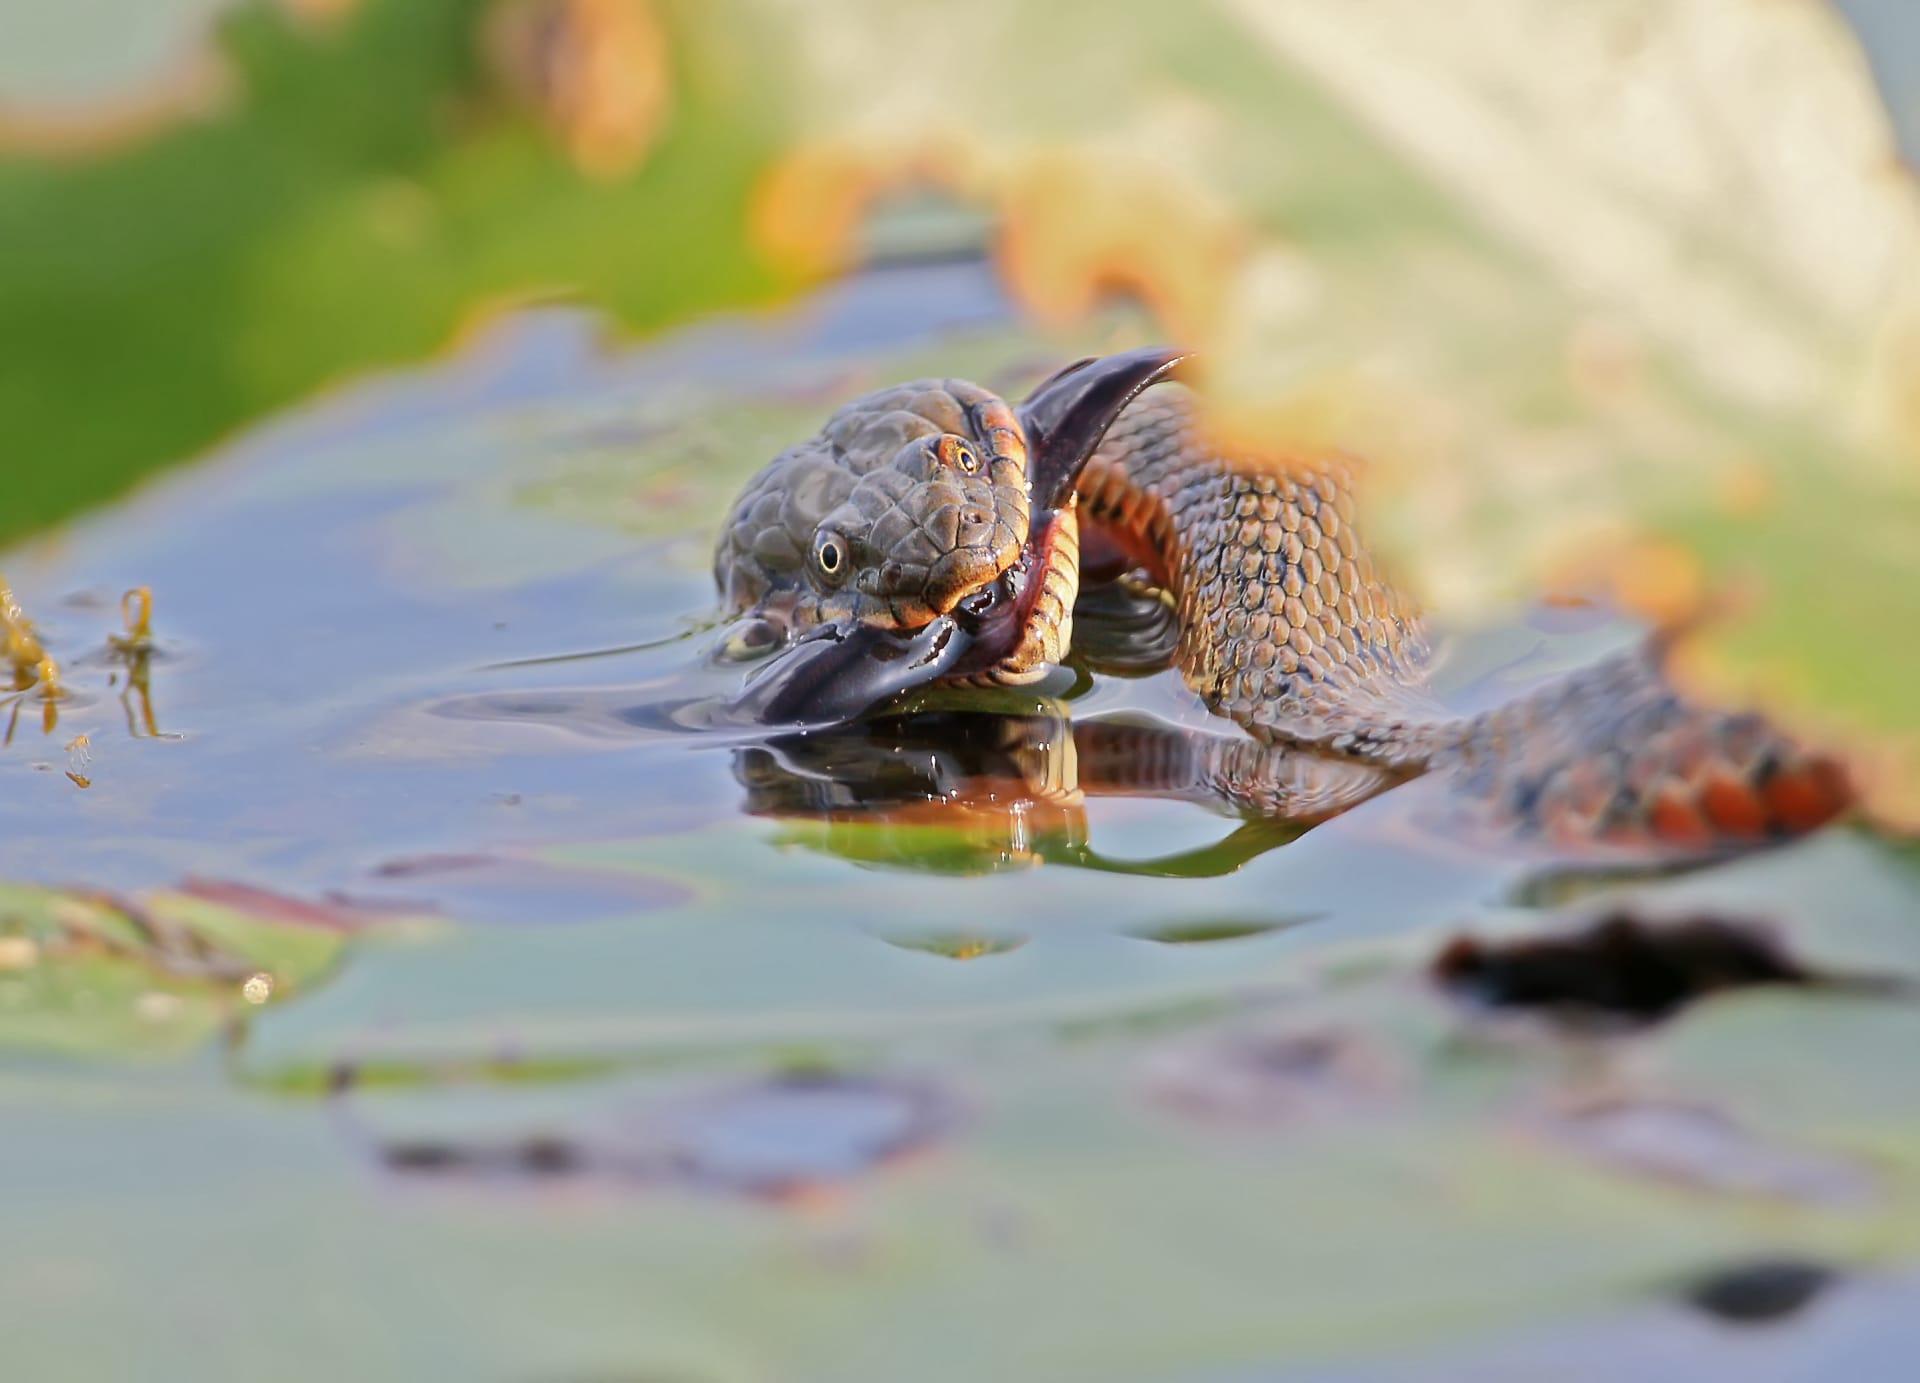 Watersnake pictures